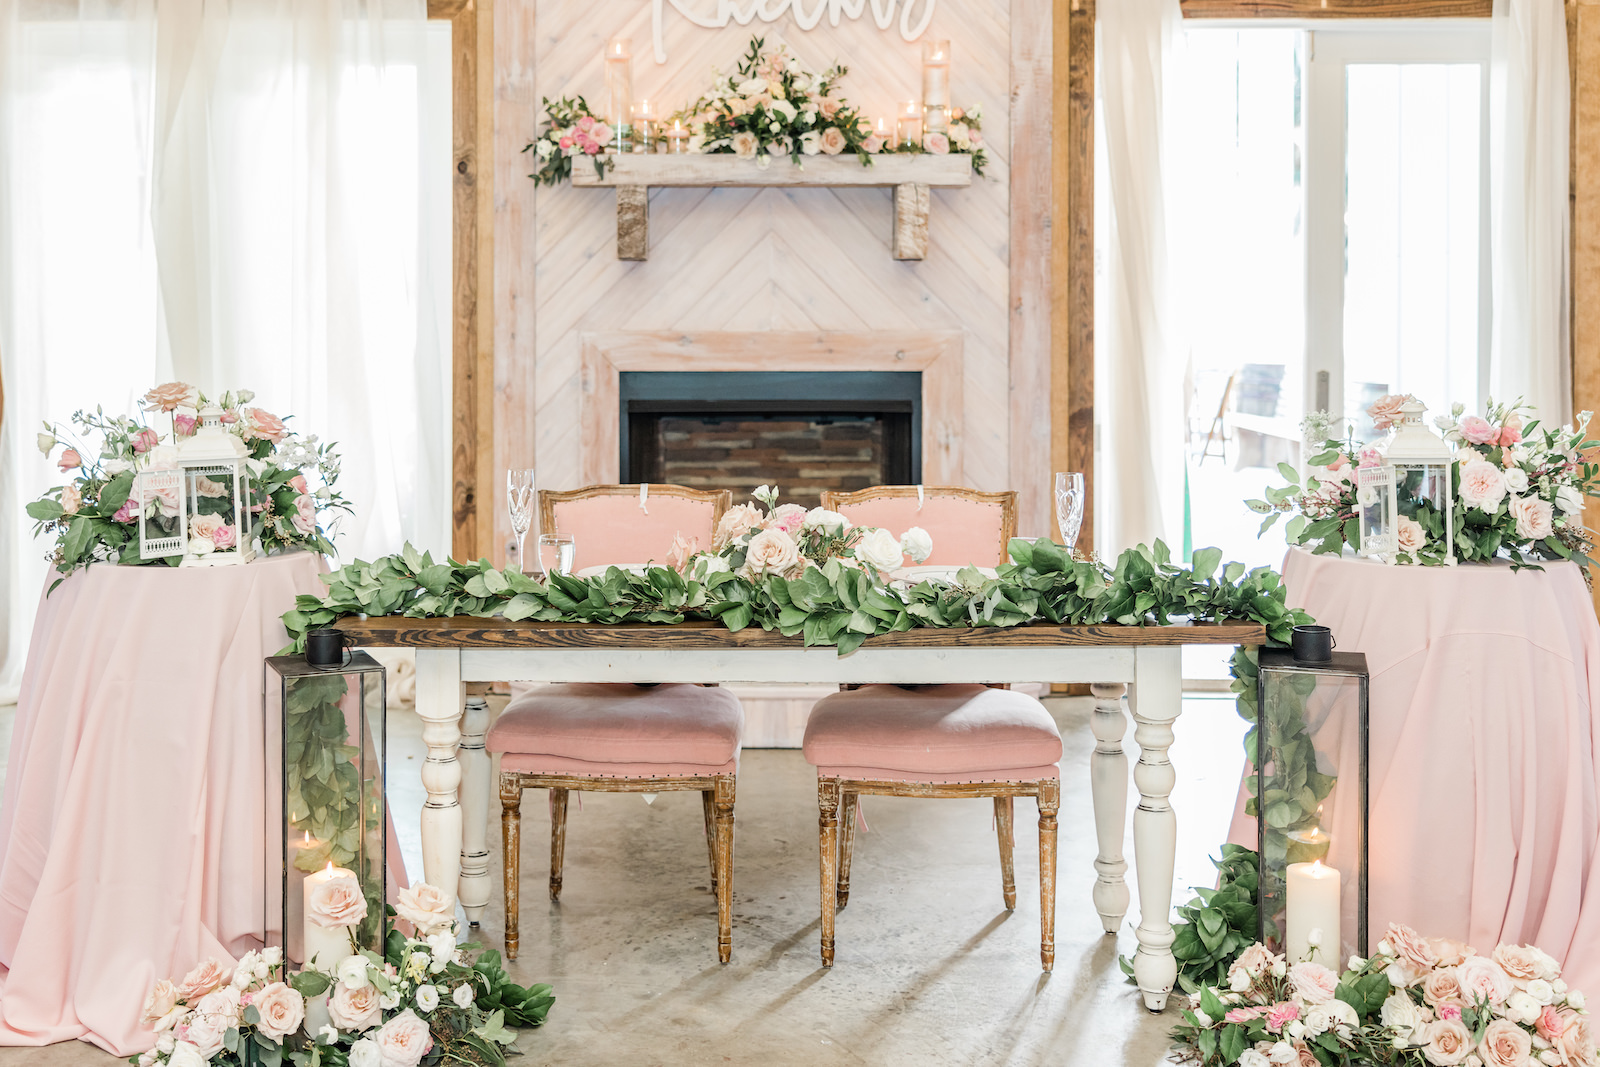 15 Fireplace Wedding Decor Ideas We're Absolutely Obsessed With